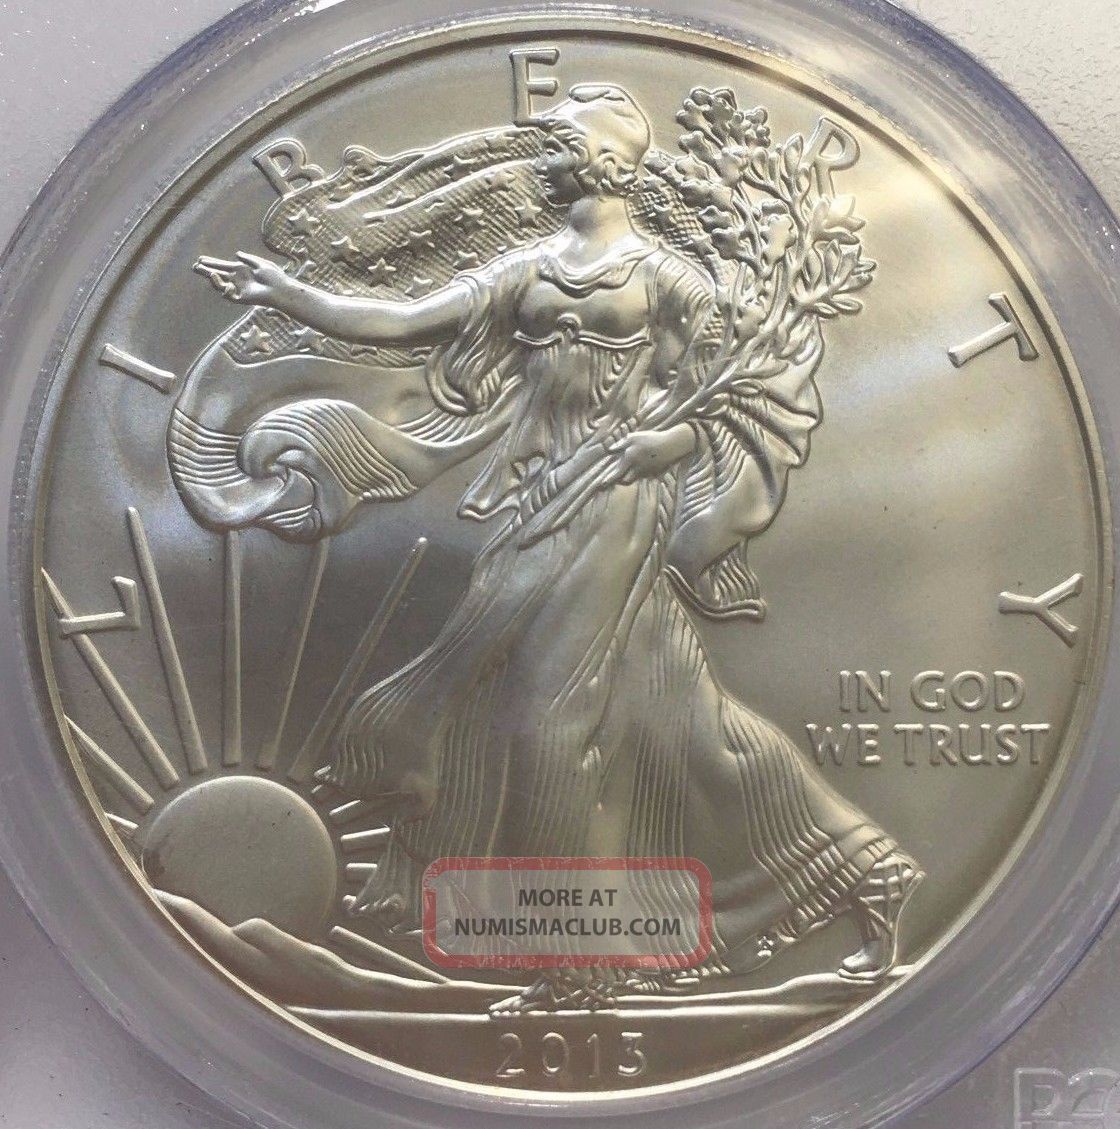 2013 Pcgs John M. Mercanti Signed Ms 70 First Strike Silver Eagle